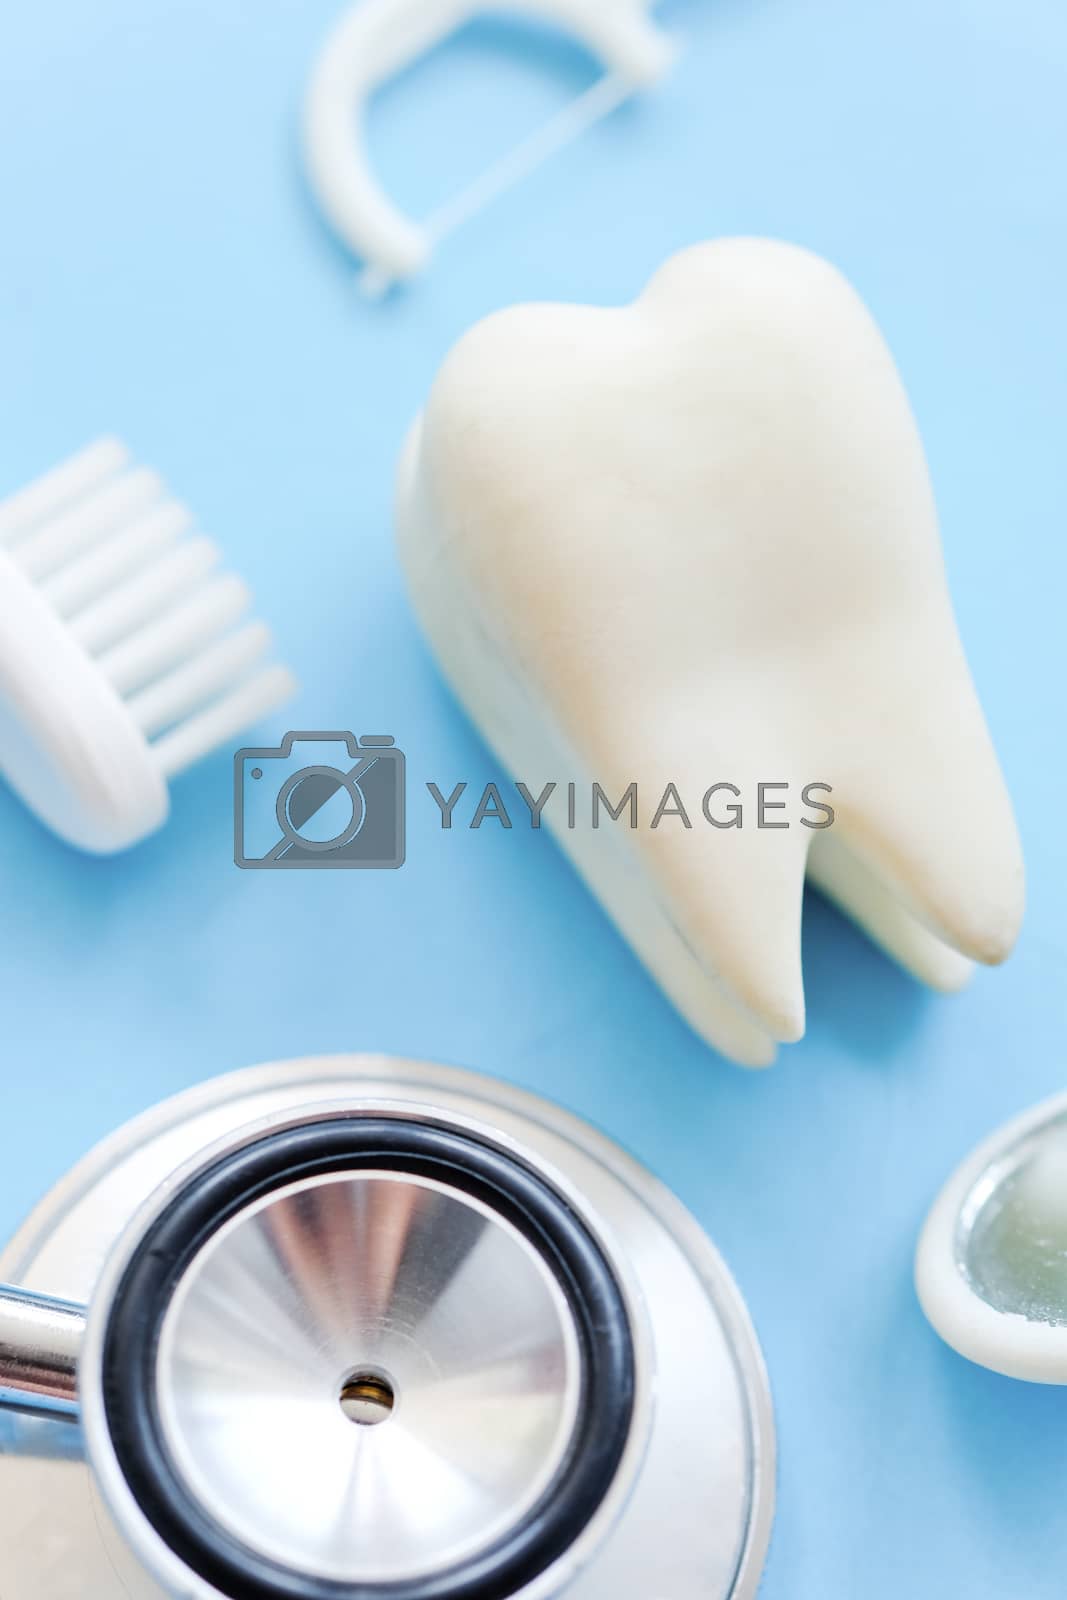 Royalty free image of dental by ponsulak